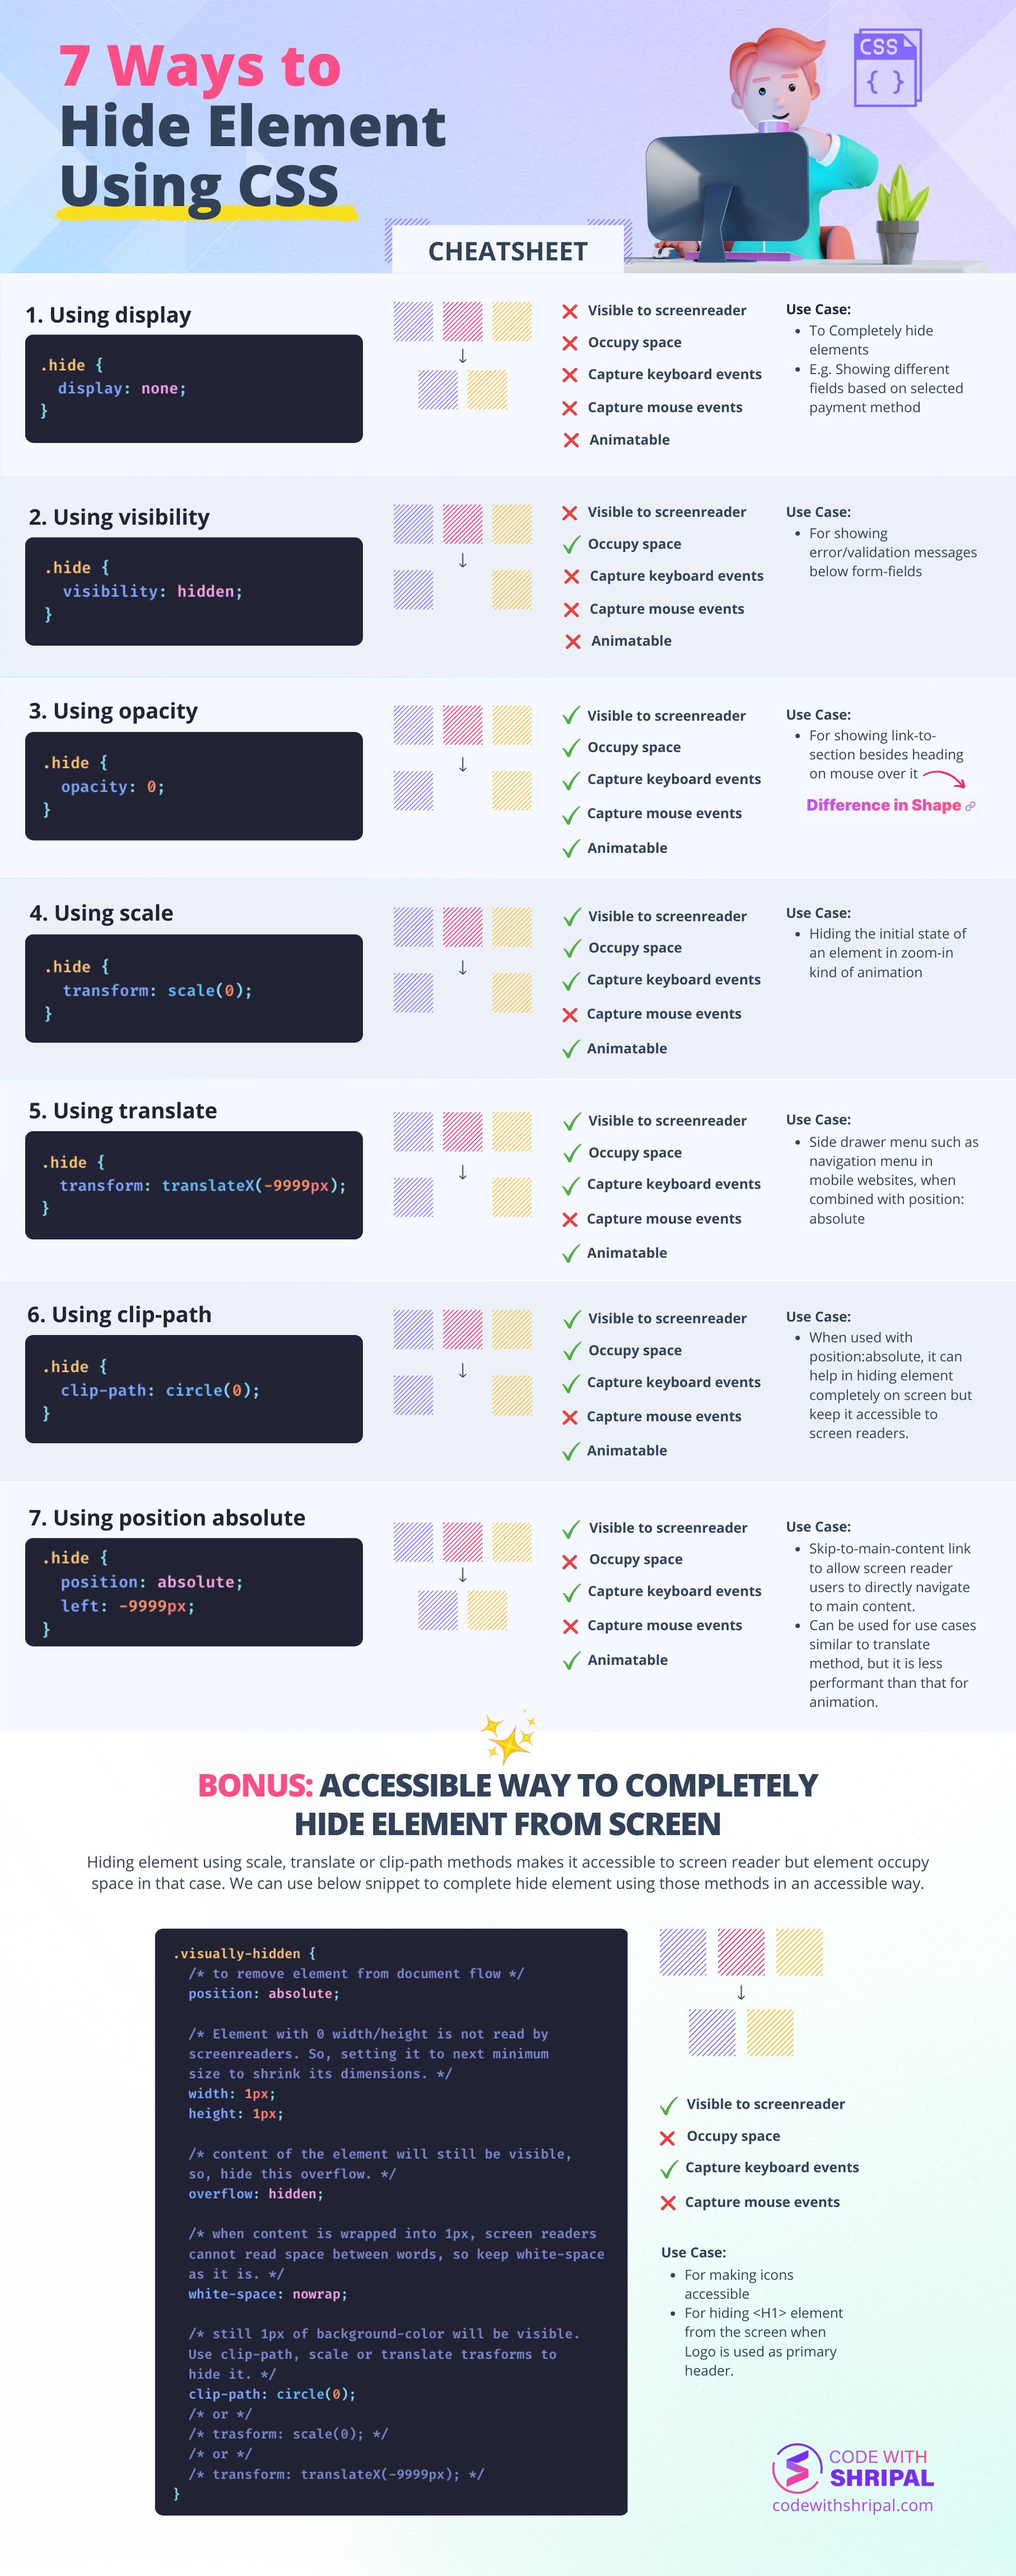 CSS Cheatsheet: Need a quick reference guide for CSS properties and syntax? Then look no further than this image related to a CSS cheatsheet. Discover the most important CSS rules and shortcuts that will save you time and simplify your workflow.